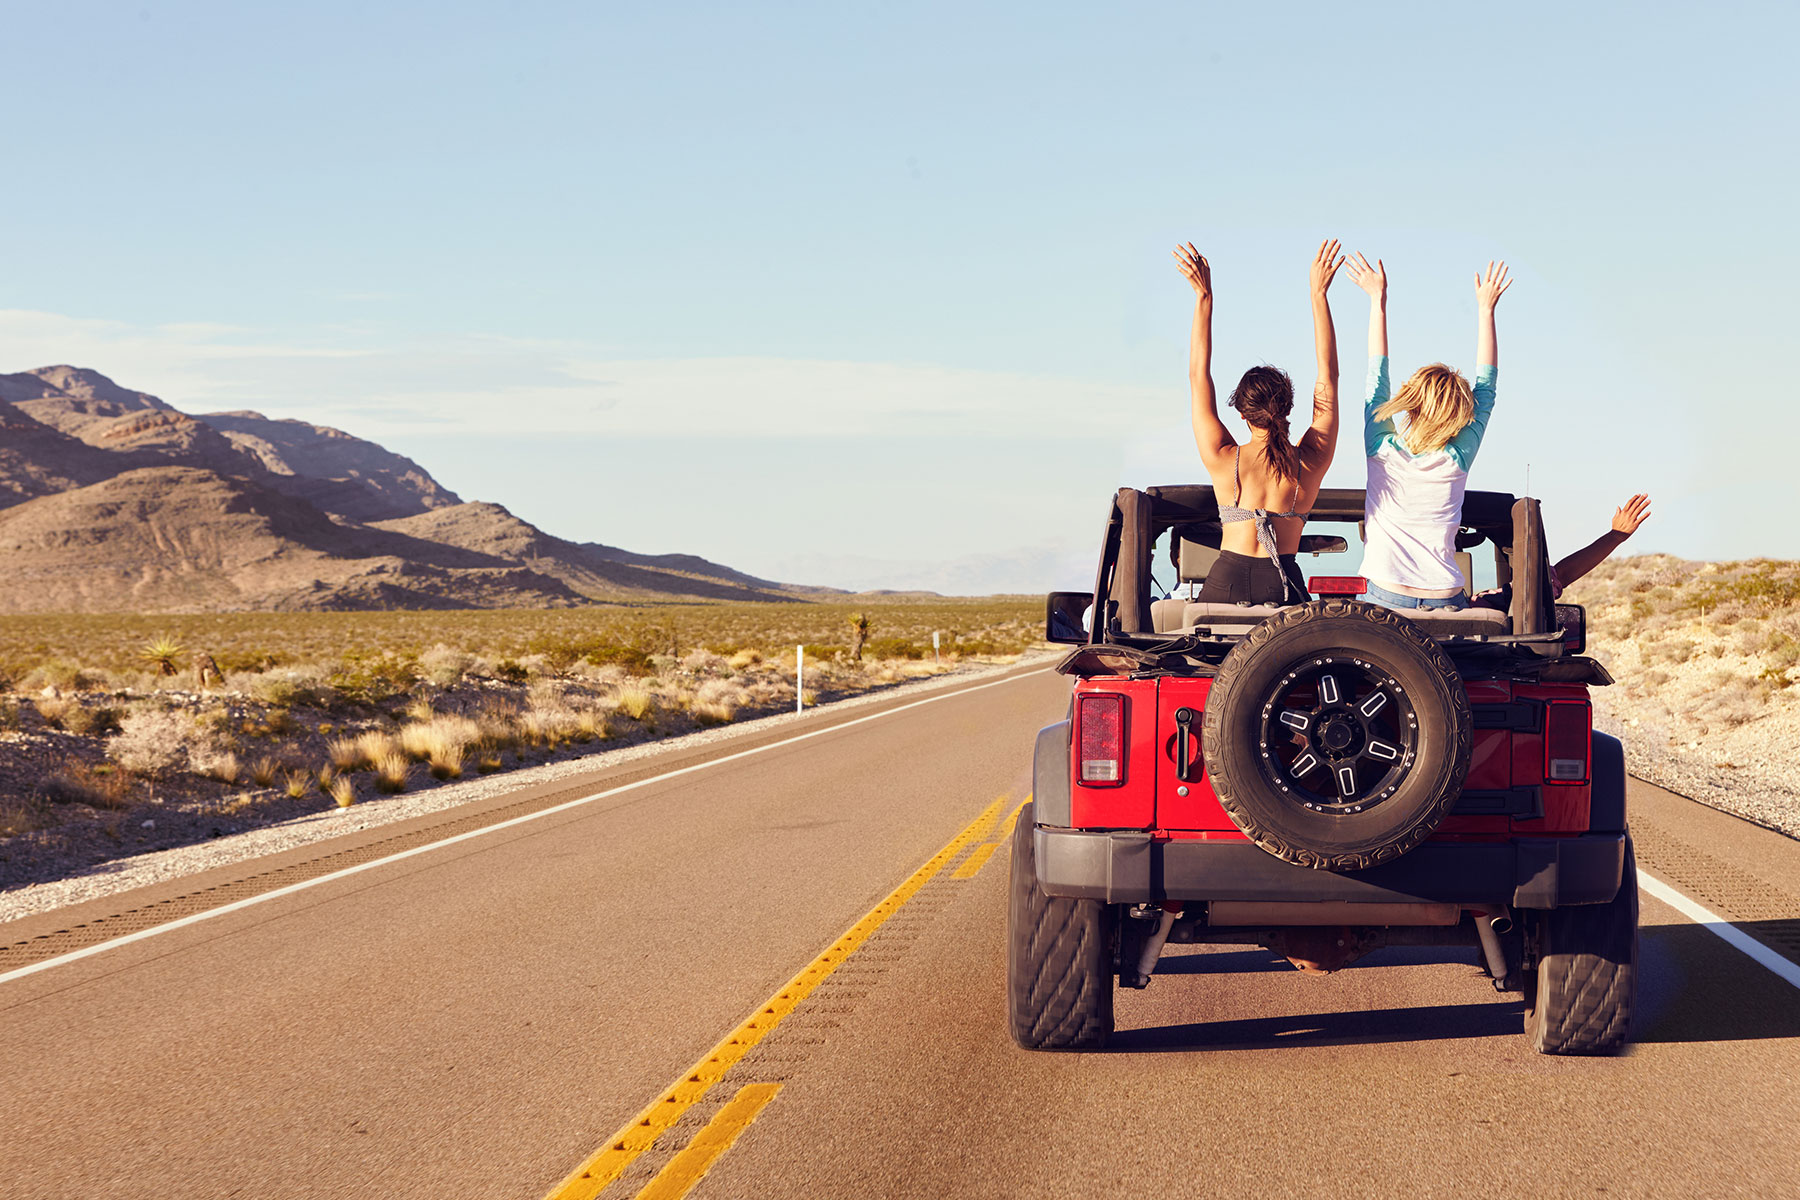 Women sitting on the back of a jeep waving their hands in the air as they drive along a road near mountains